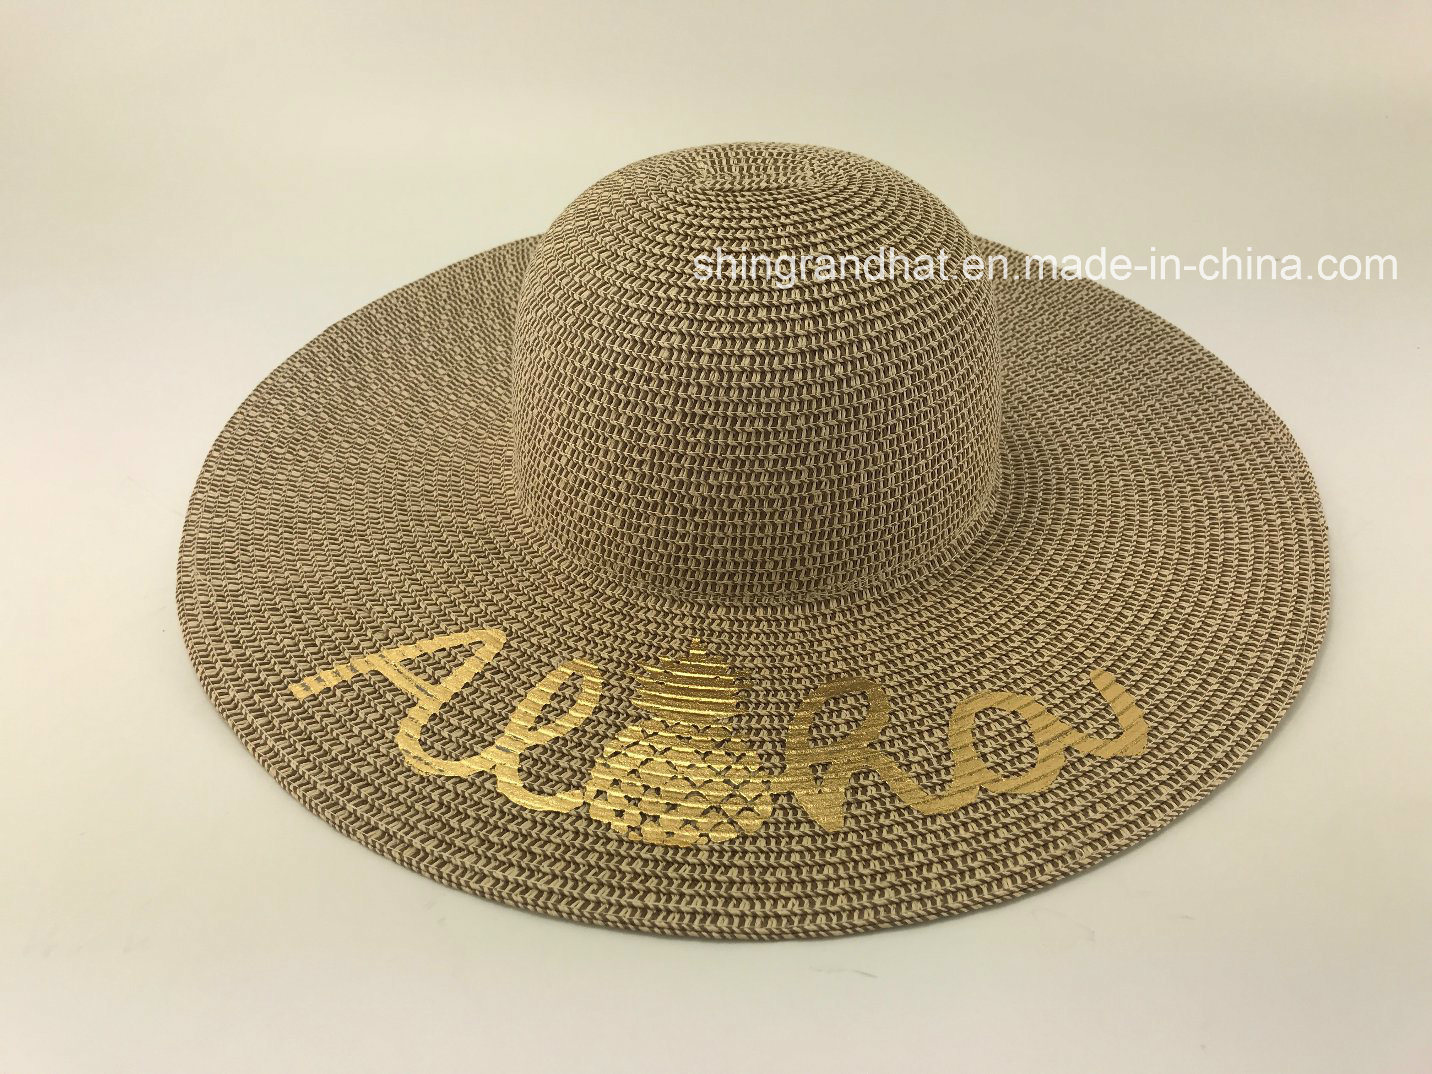 Mixed Paper Straw Braid with Golden Pineapple Printed Hat